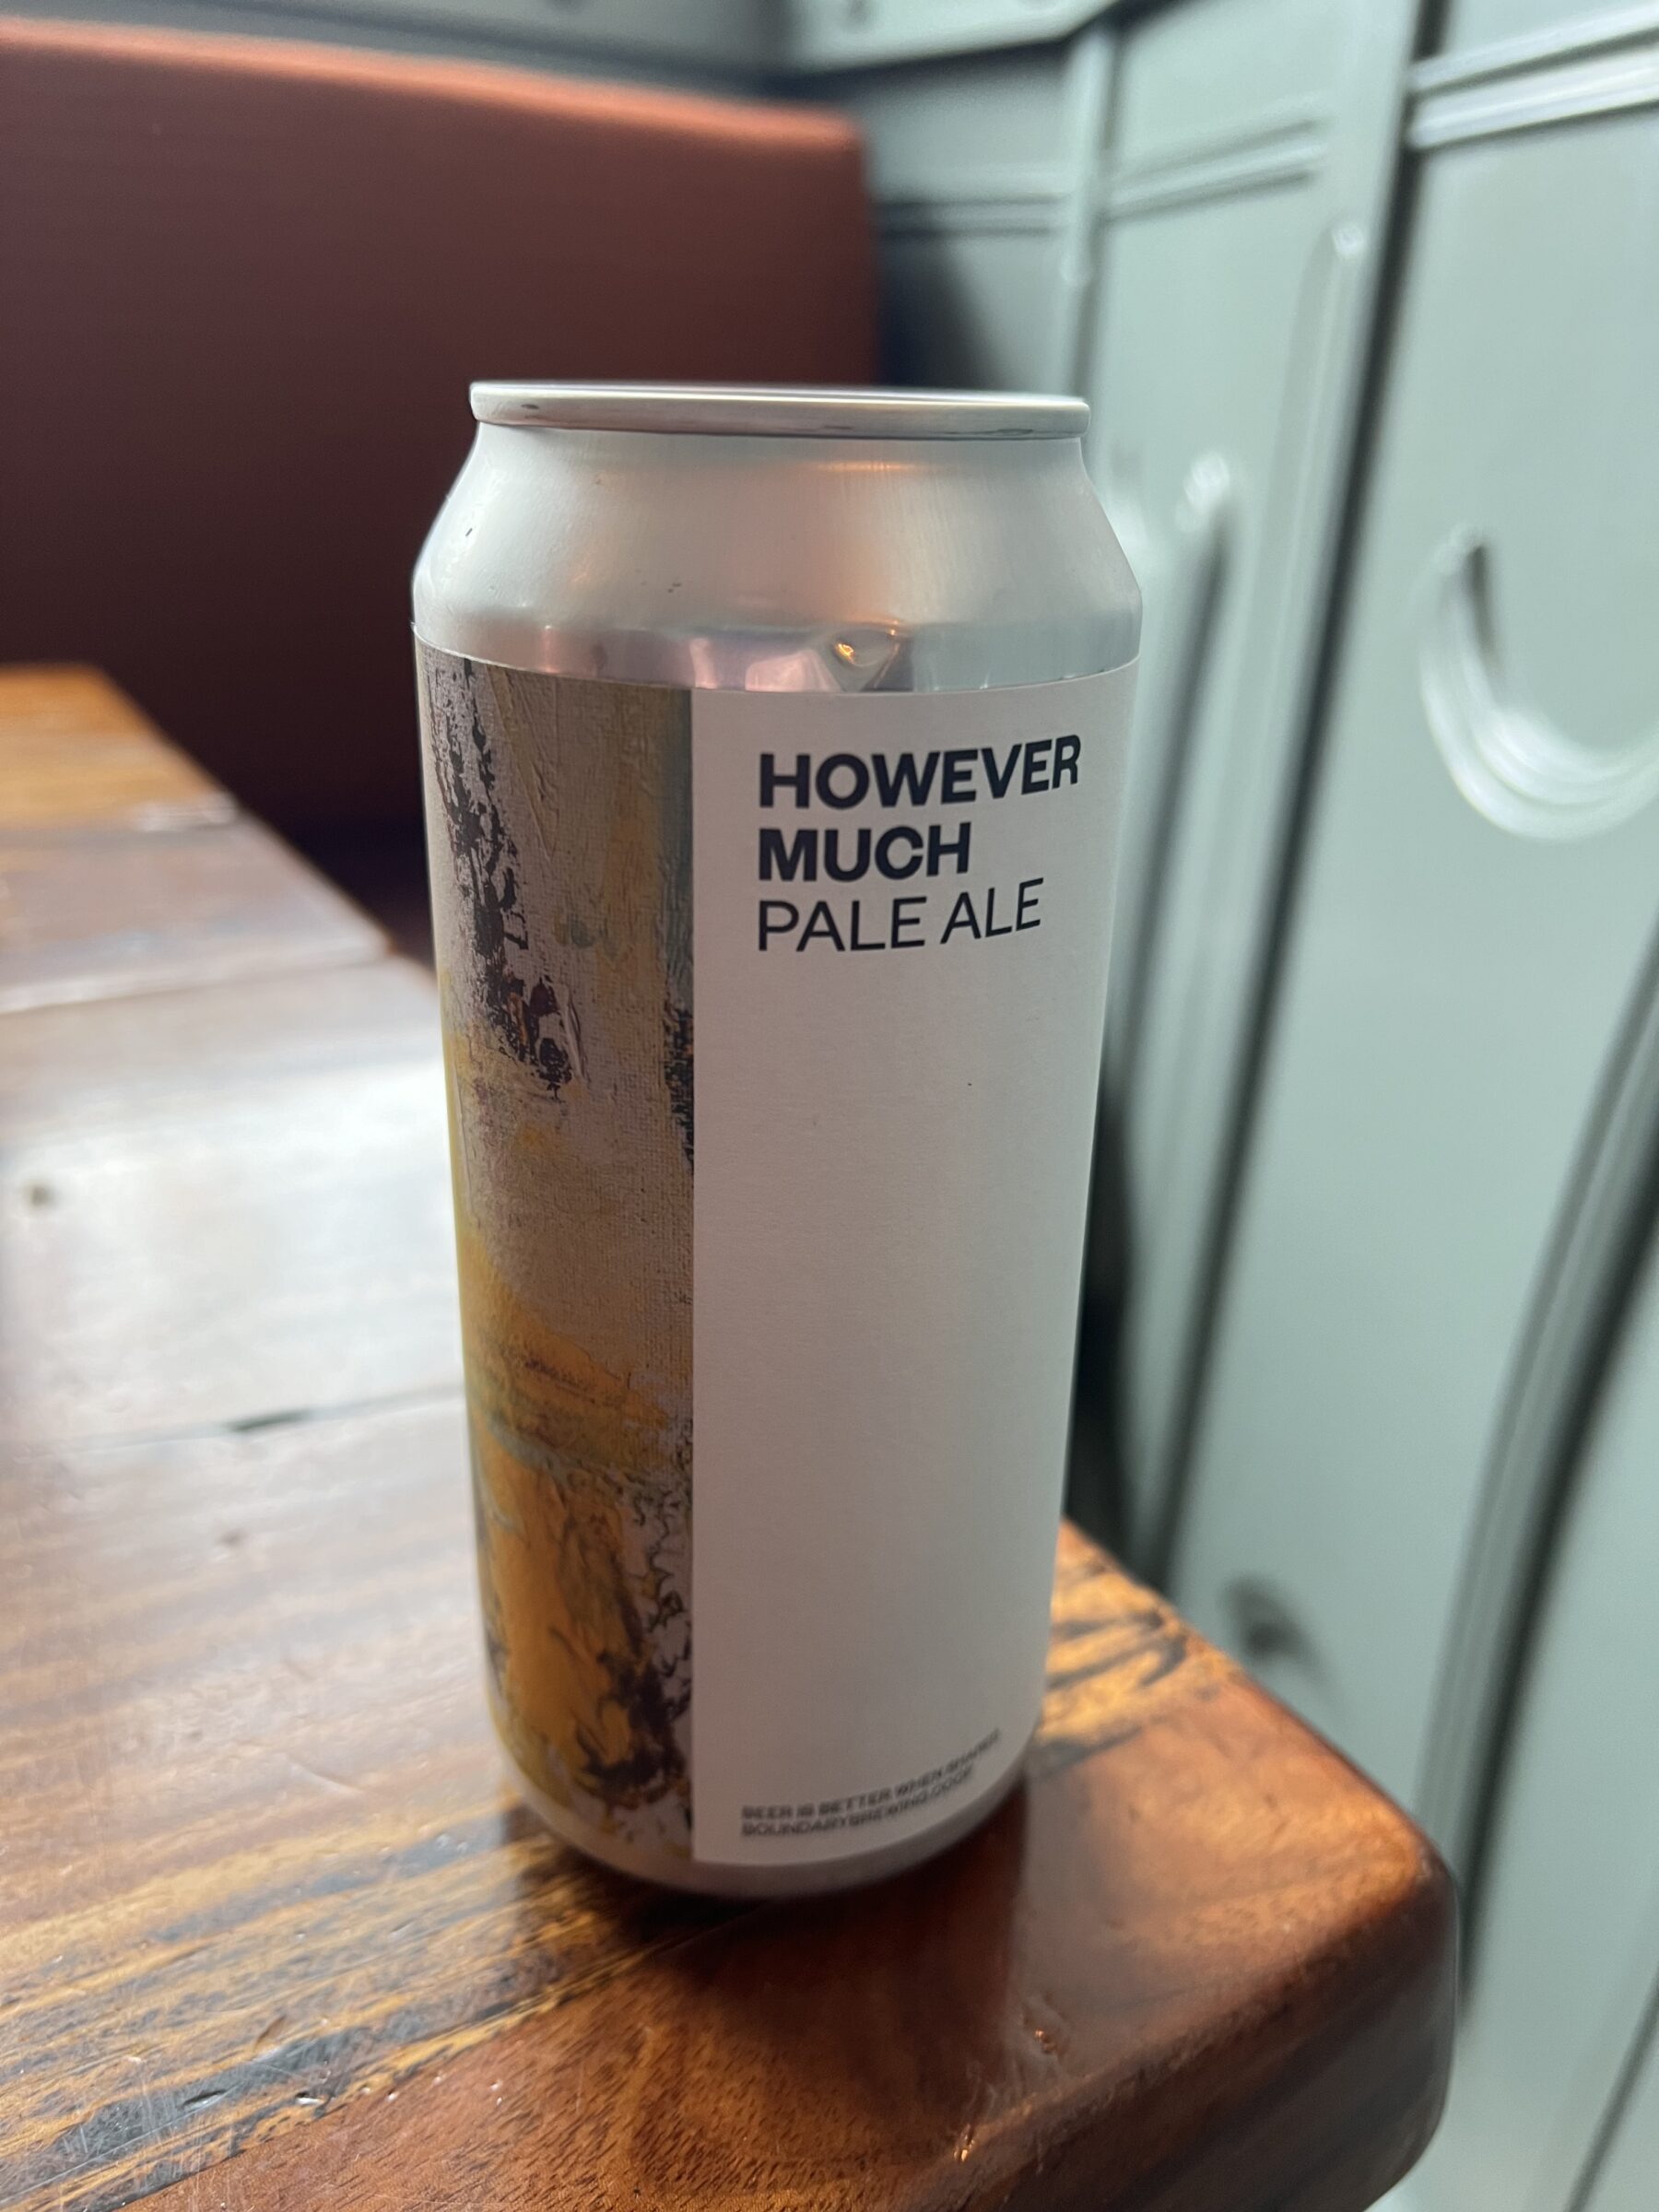 NEW BEER: However Much from Boundary Brewing